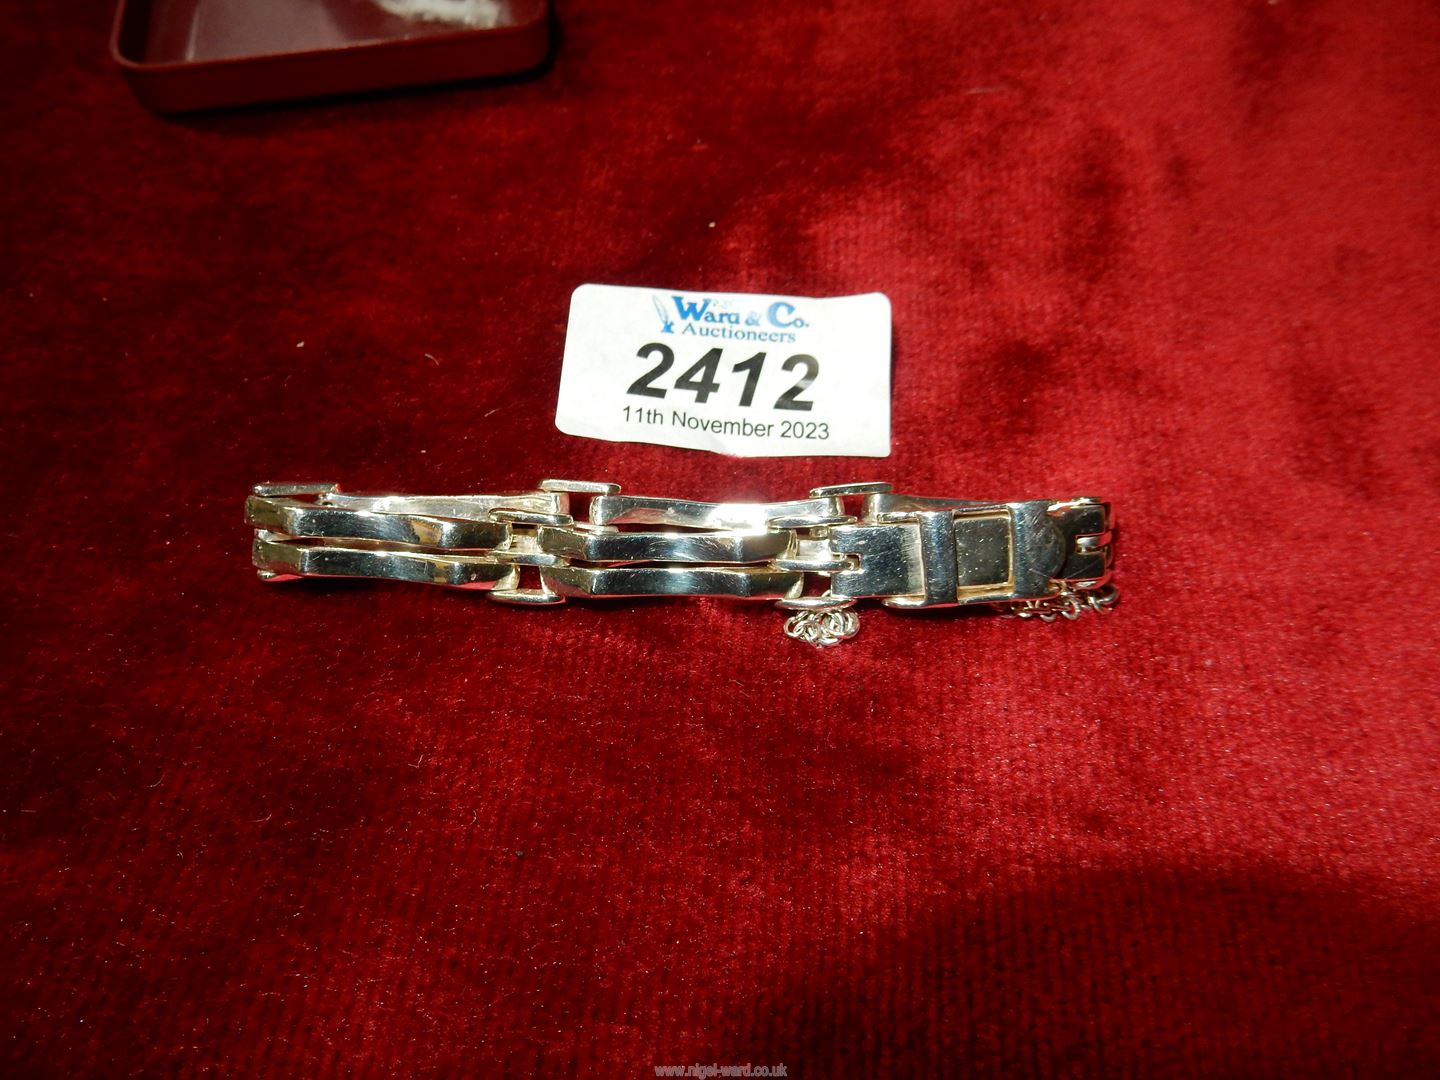 A 925 silver bracelet with safety chain.